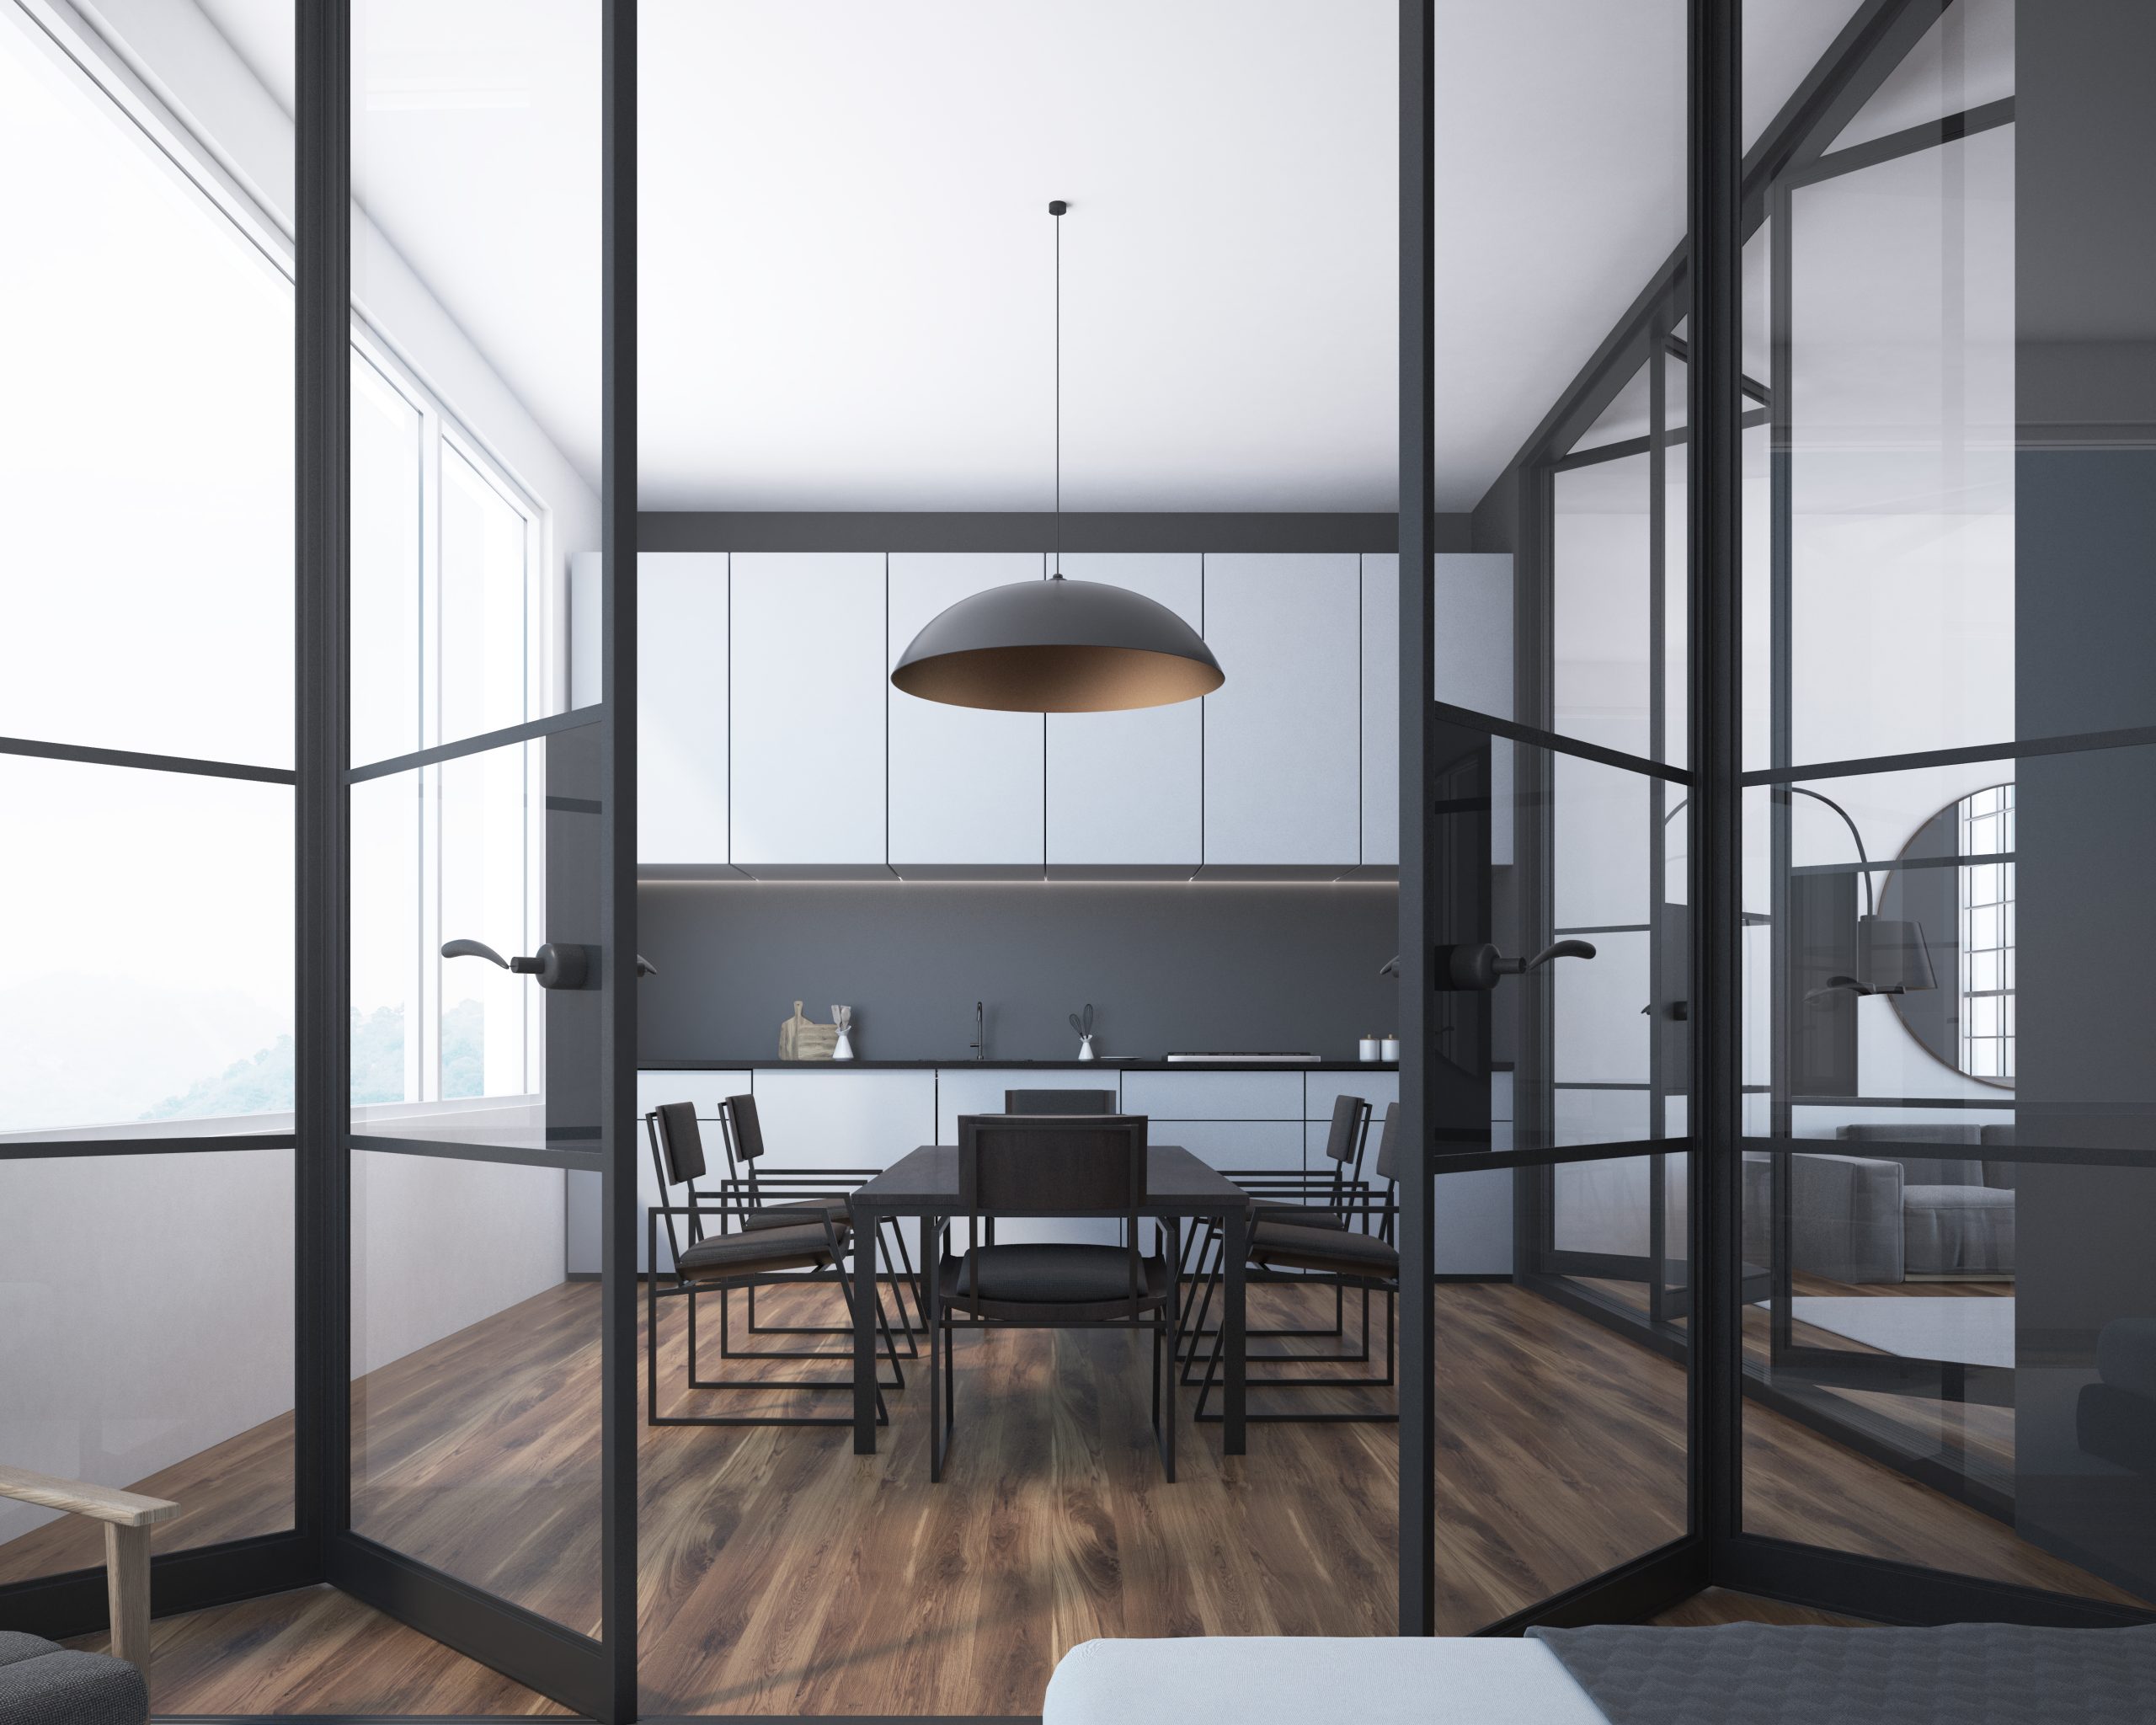 The Future is Now: Smart Glass Trends in Interior Design